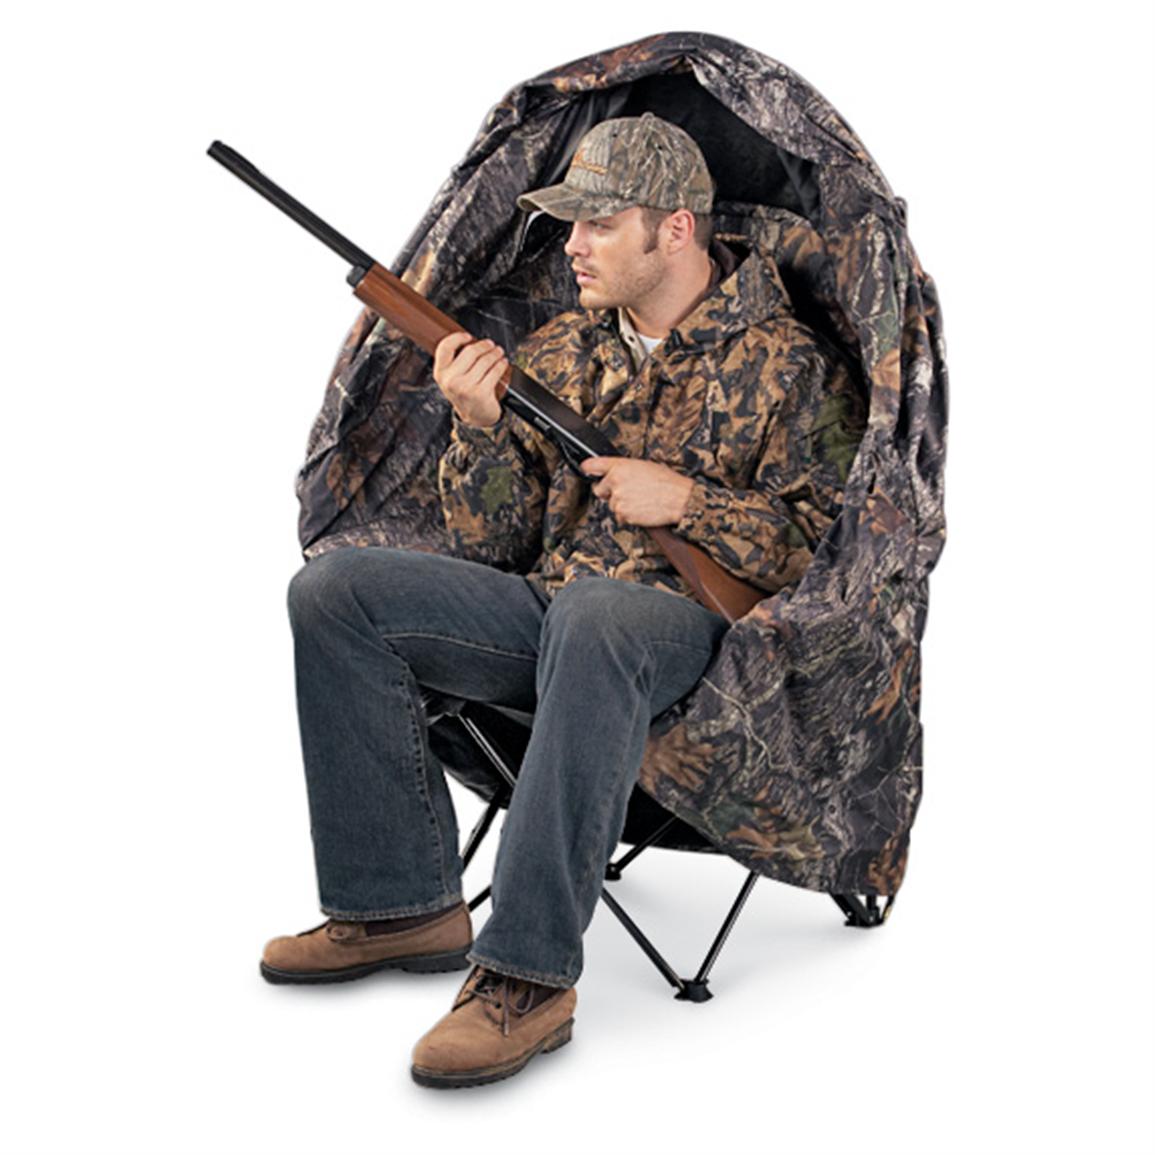 Chair Blind 110828 Ground Blinds At Sportsman S Guide